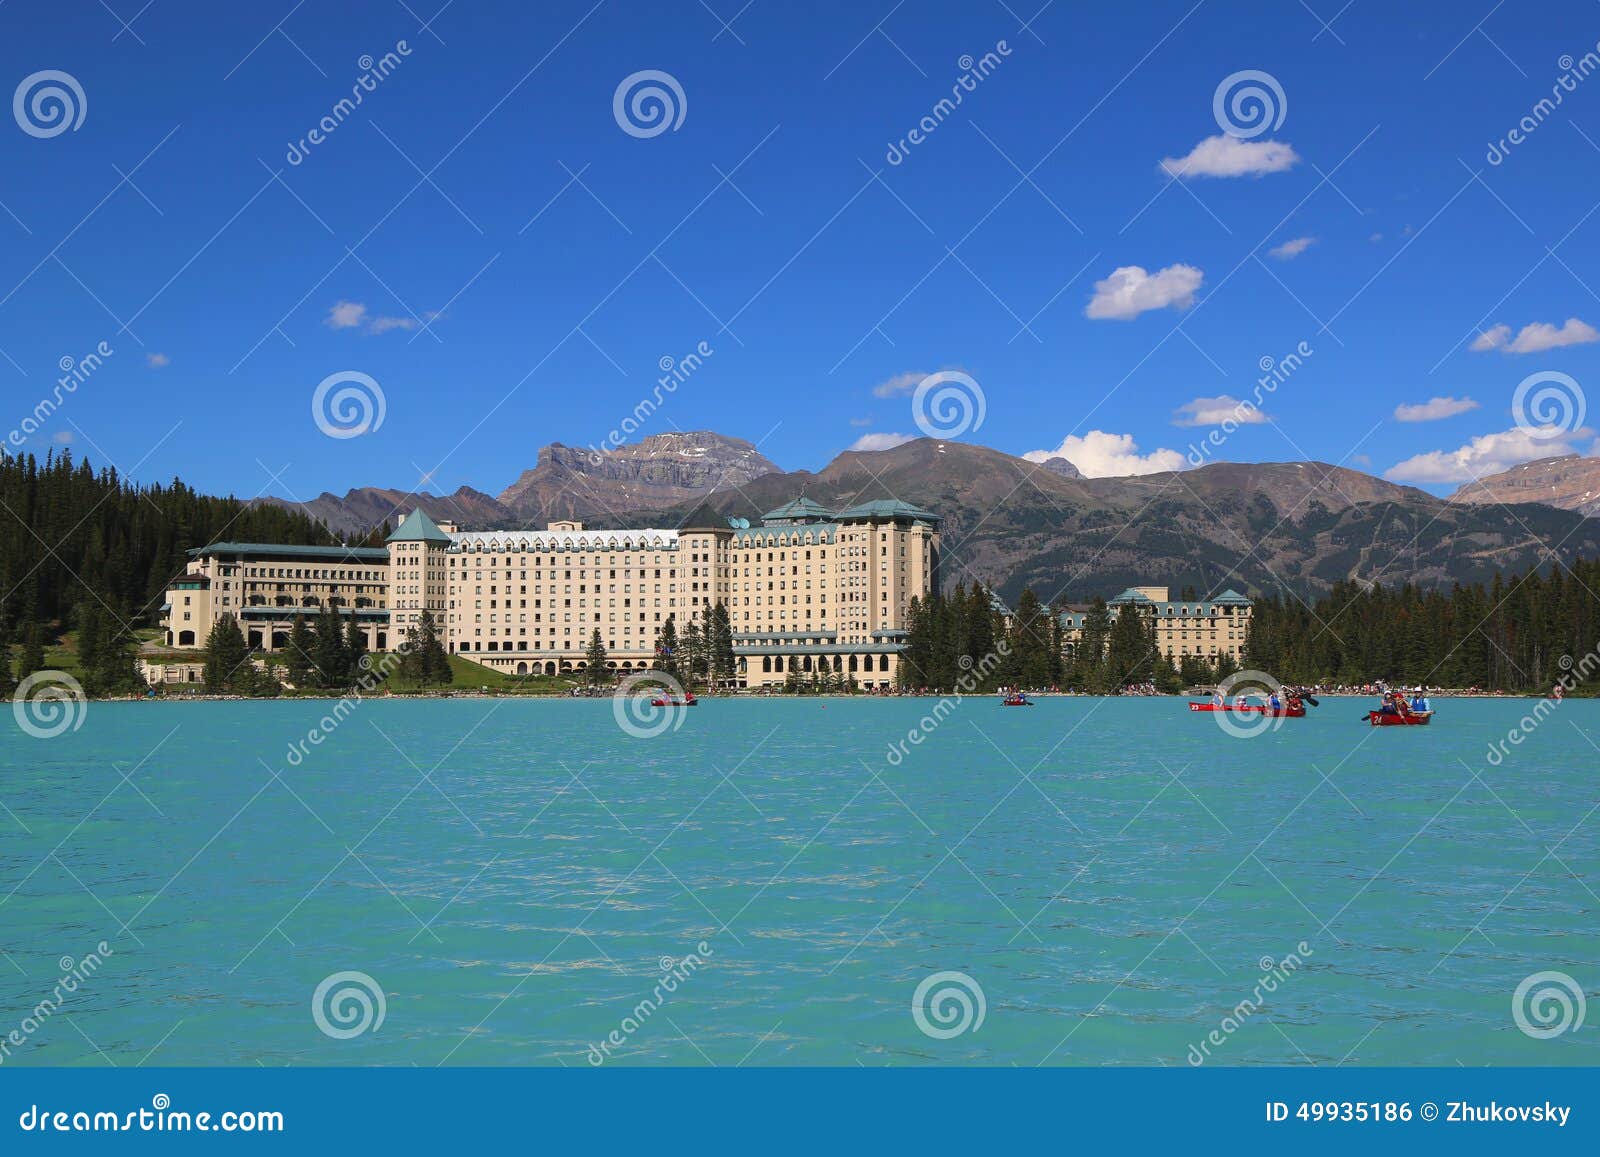 View Of The Famous Fairmont Chateau Lake Louise Hotel Editorial Photo - Image: 49935186